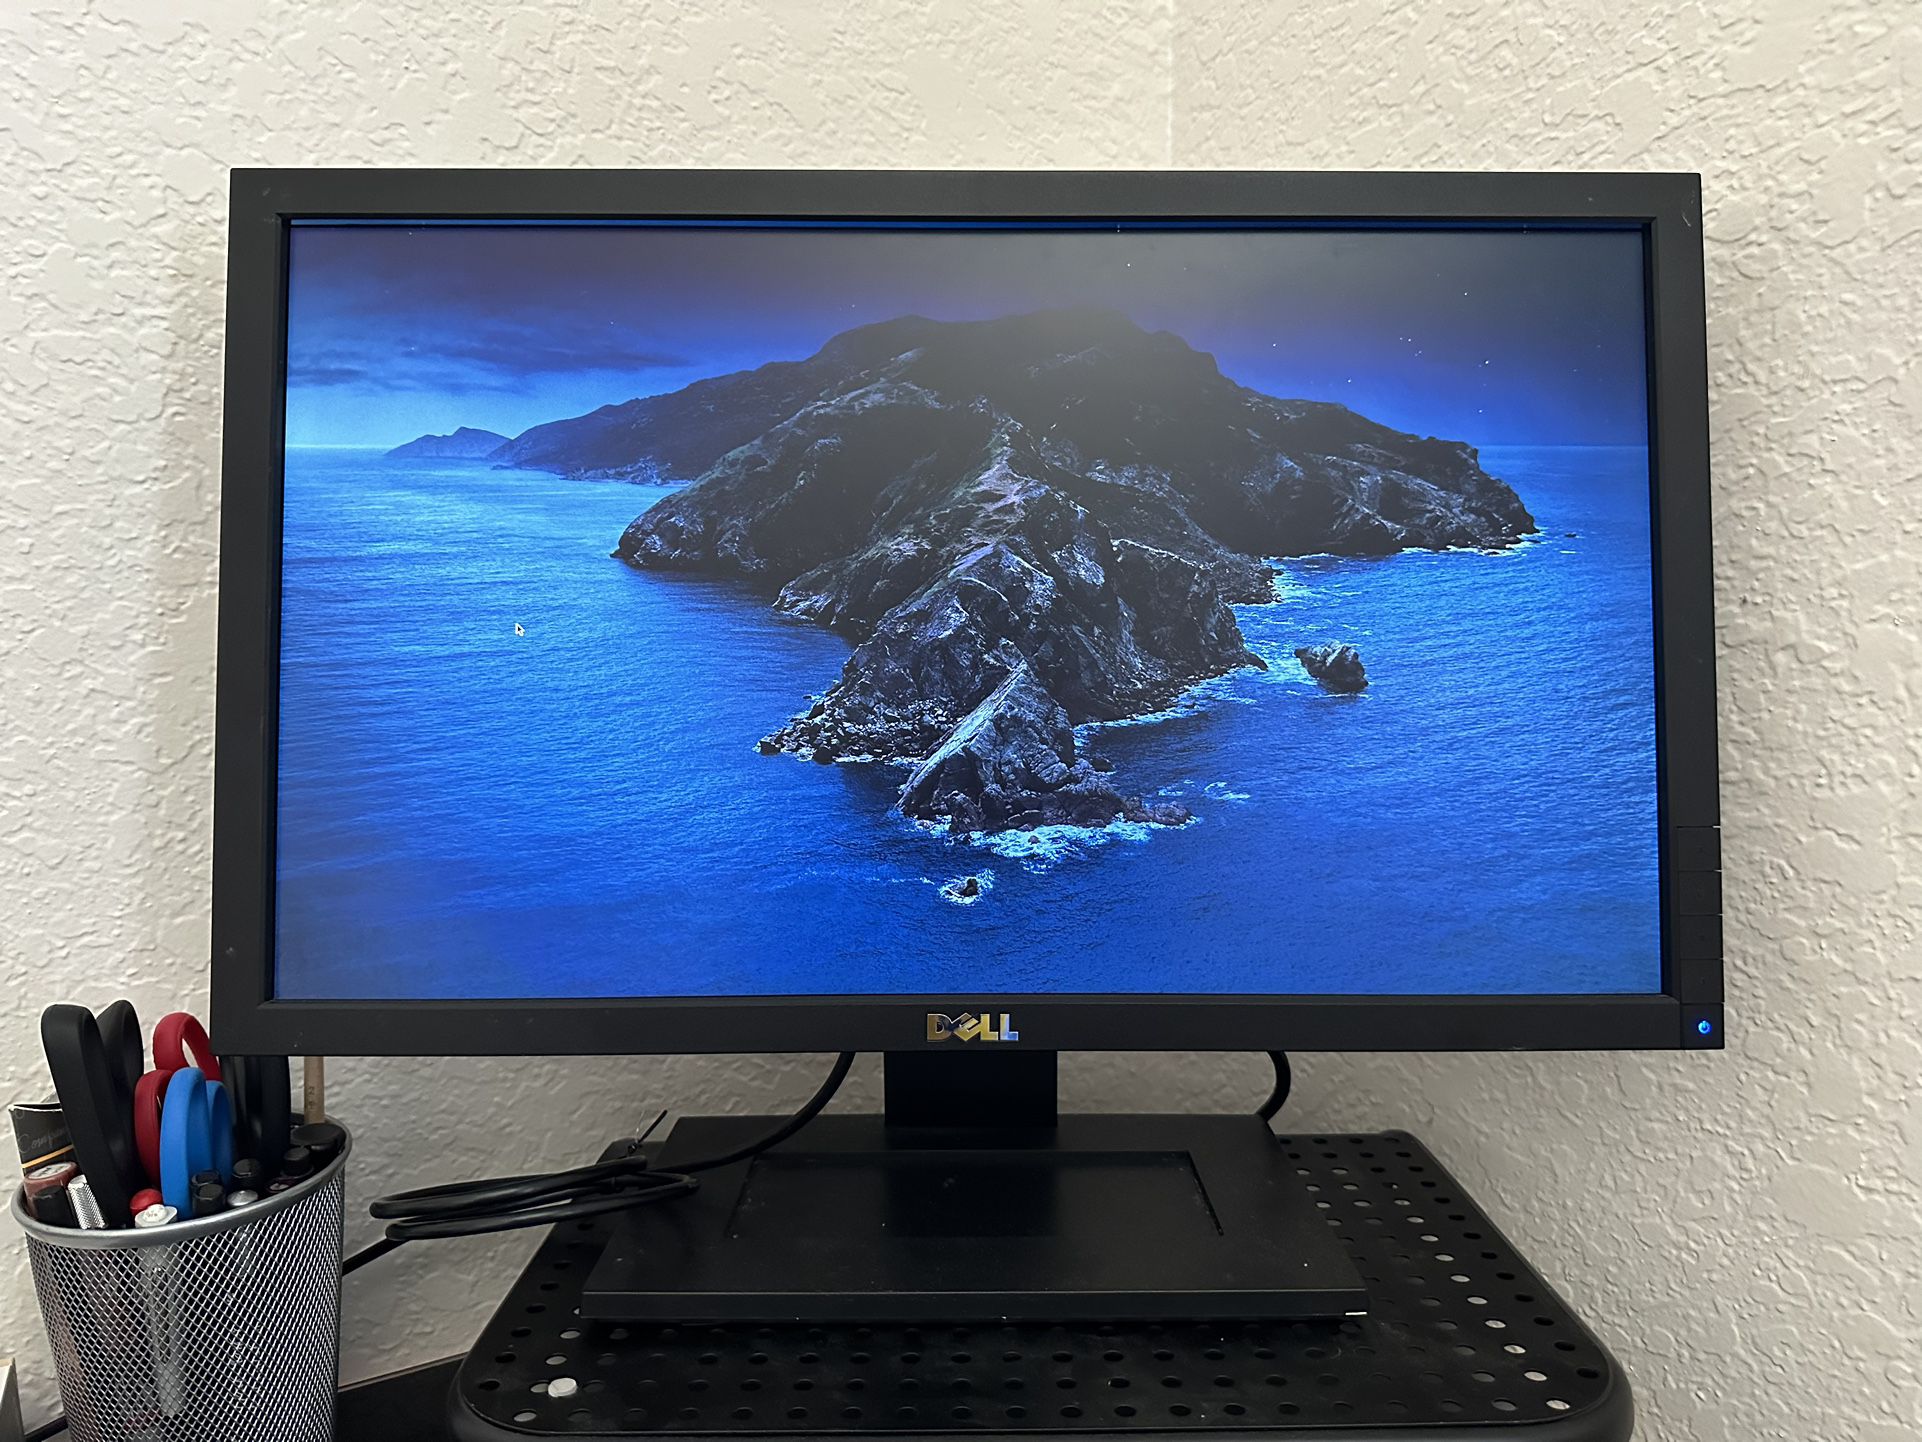 Dell 21.5" Widescreen LED LCD Monitor